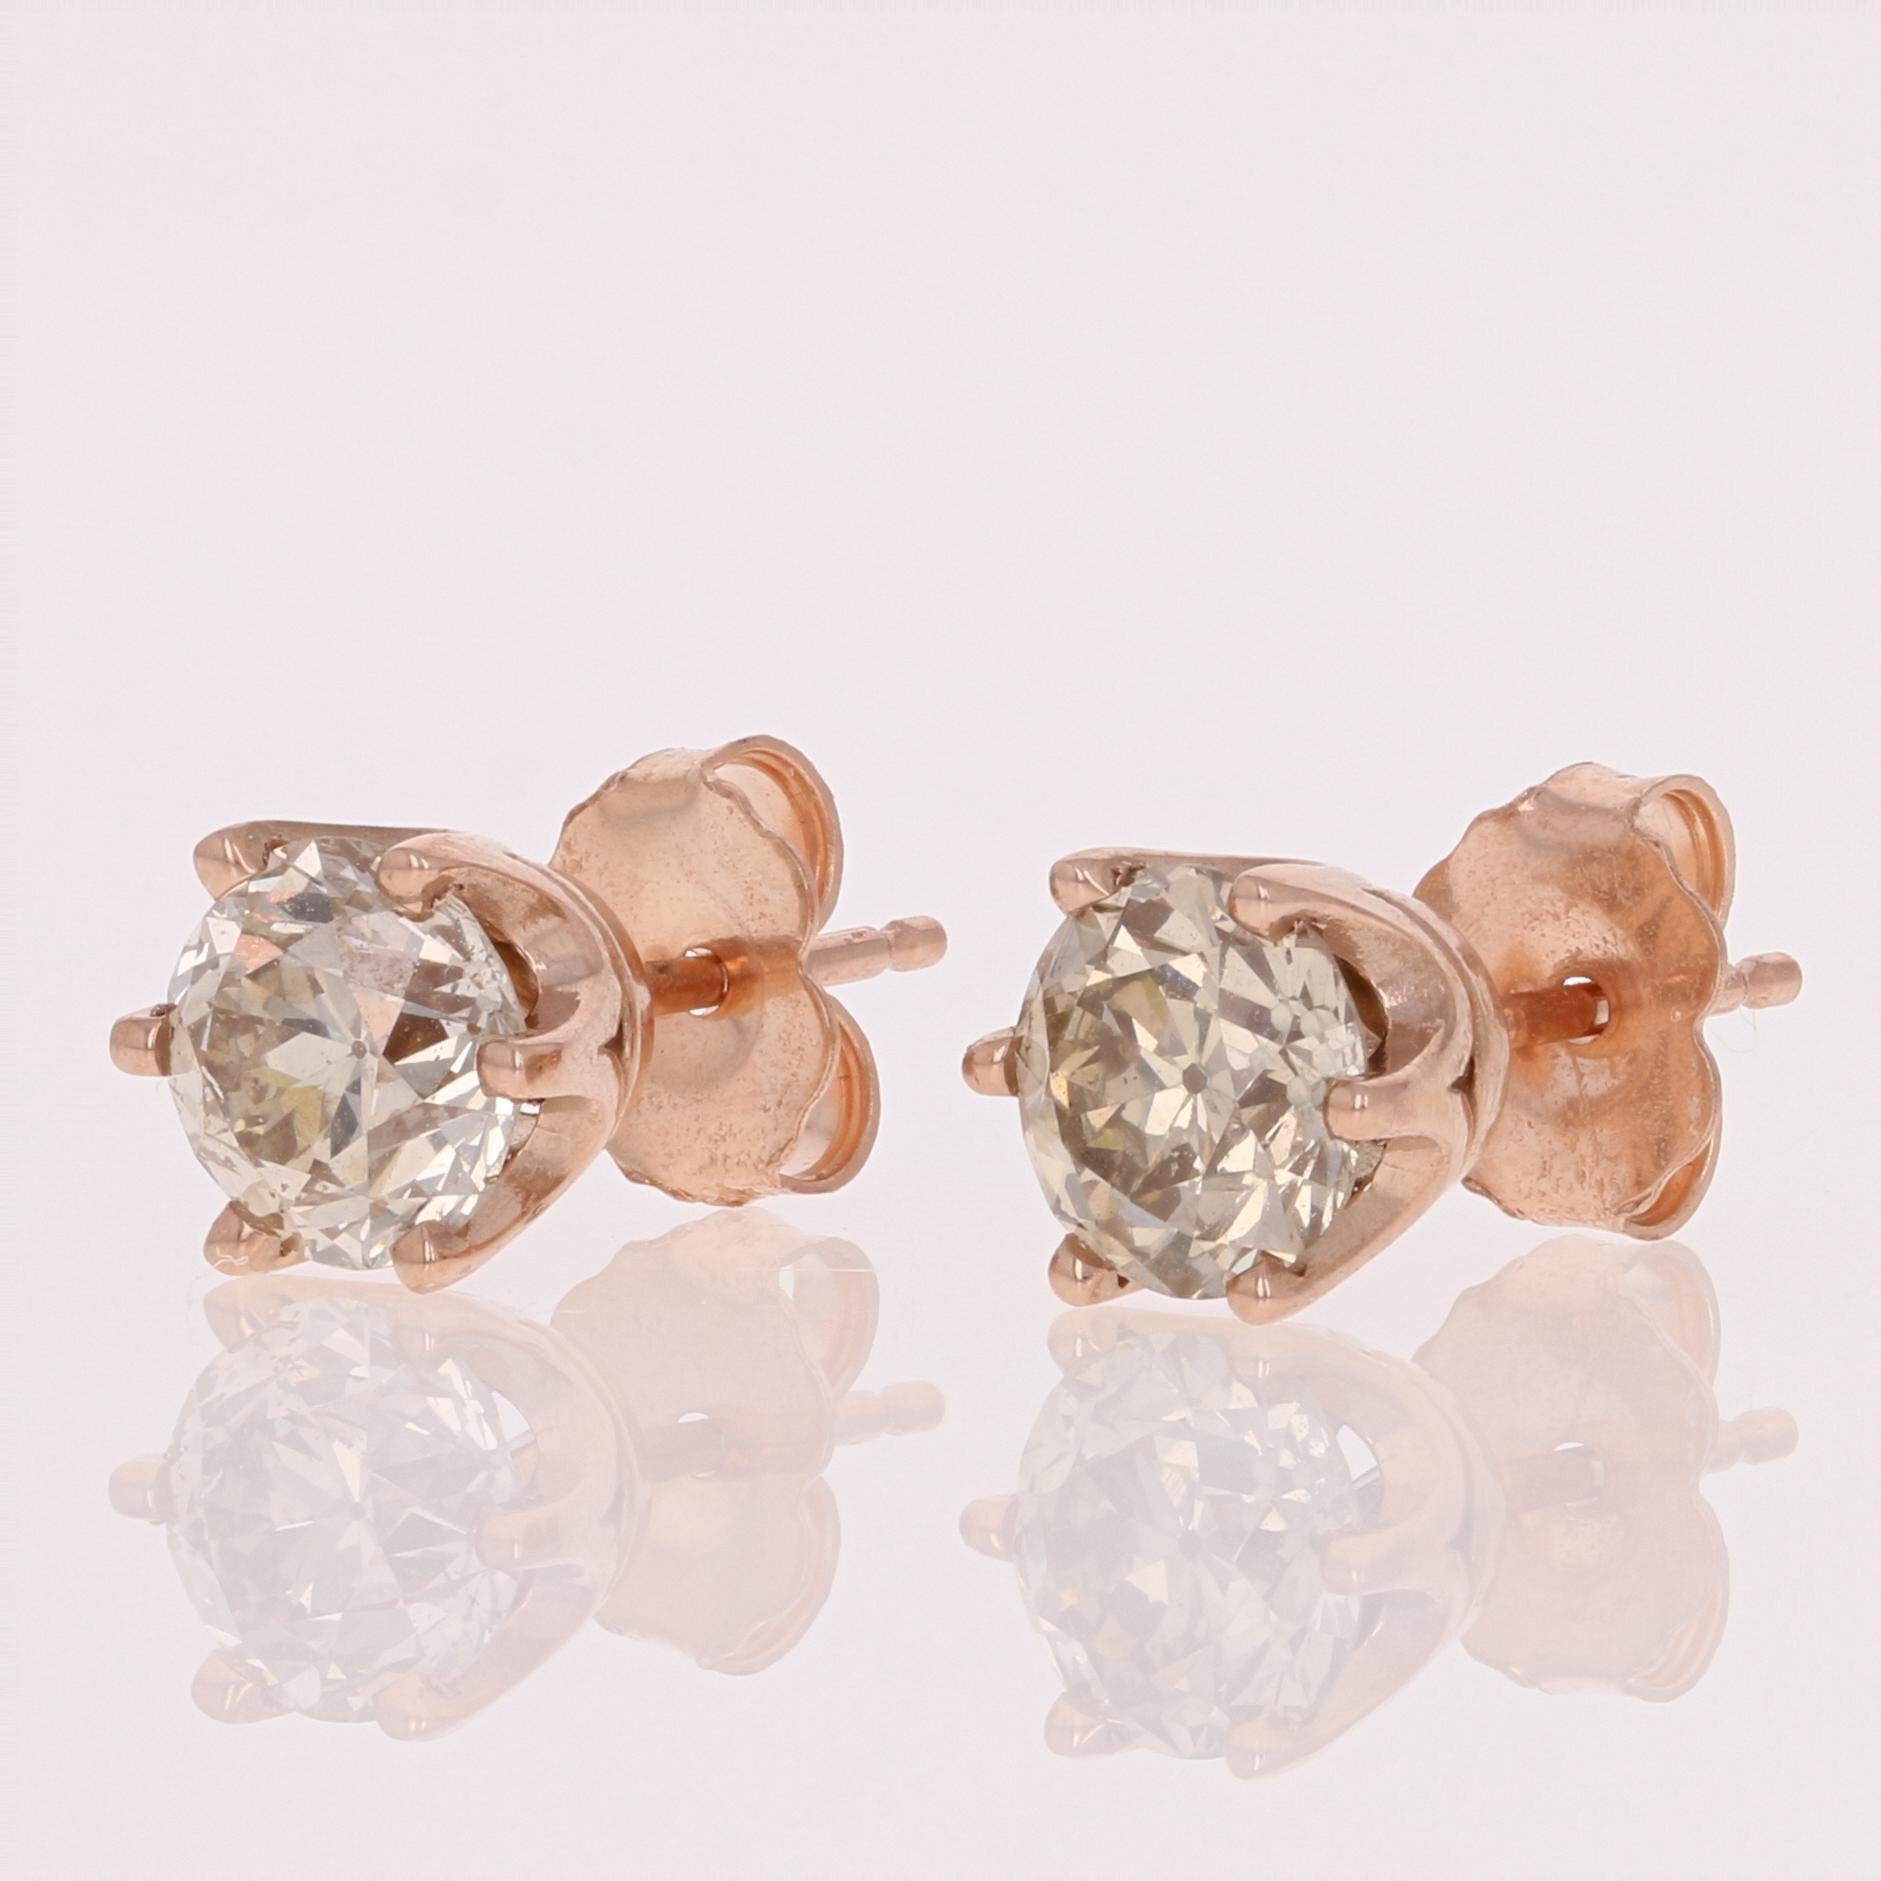 Get ready to shine! Fashioned in 14k rose gold, these NEW stud earrings are set aglow with champagne brown diamonds held in six-prong mounts.

Metal Content: Guaranteed 14k Gold as stamped

Stone Information:
Natural Diamonds -  
Clarity: SI1 -